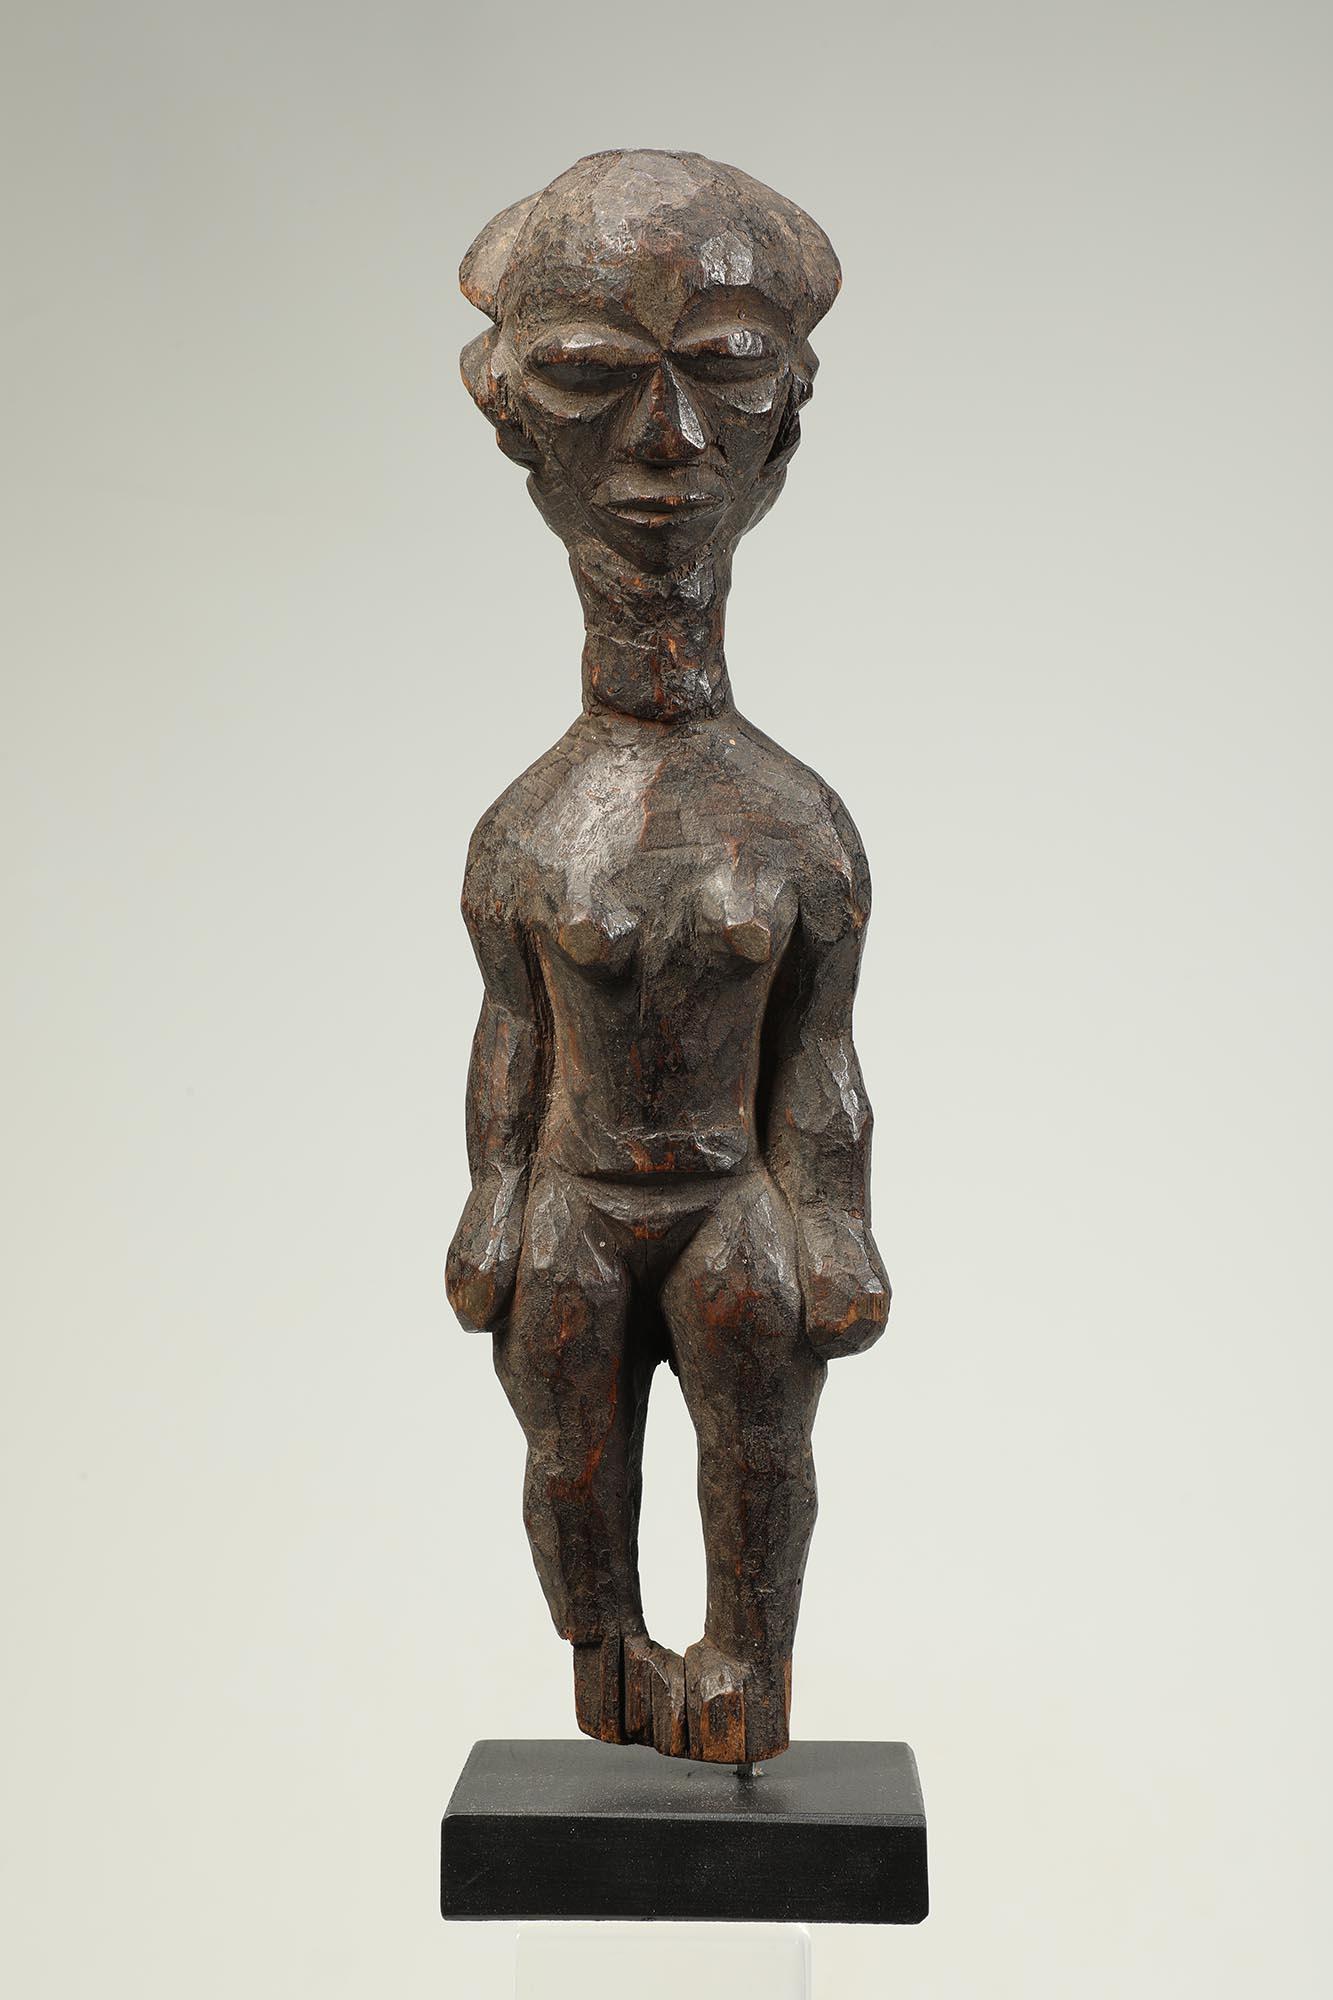 Rare carved wood standing female Pende figure with arms at sides cascading hair.   Classic downturned Pende style face, feet absent.  Democratic Republic of Congo, early to mid-20th century.
Figure is 12 inches high, on custom wood base total height